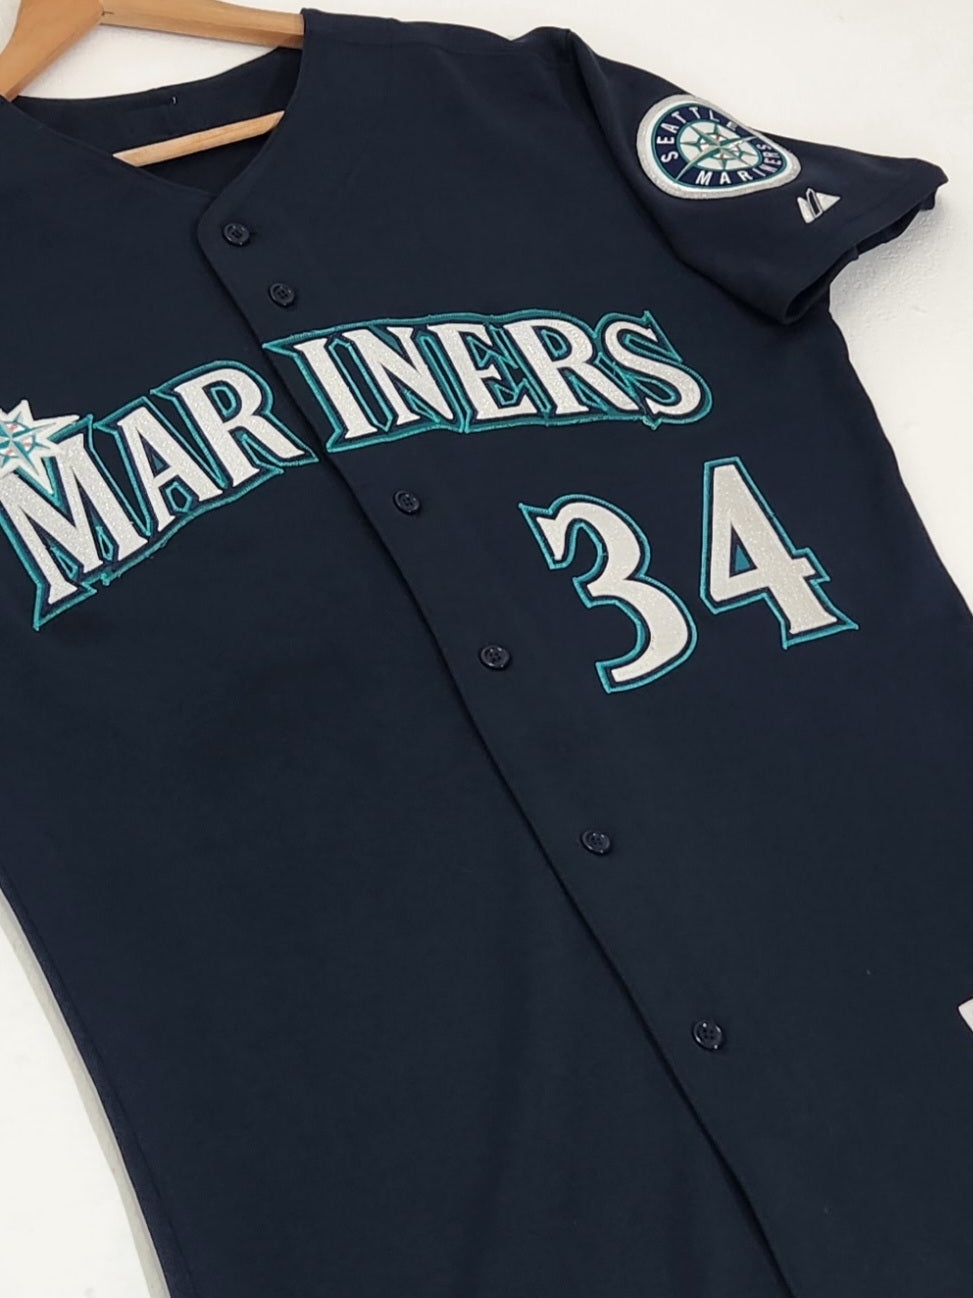 mariners jersey blue